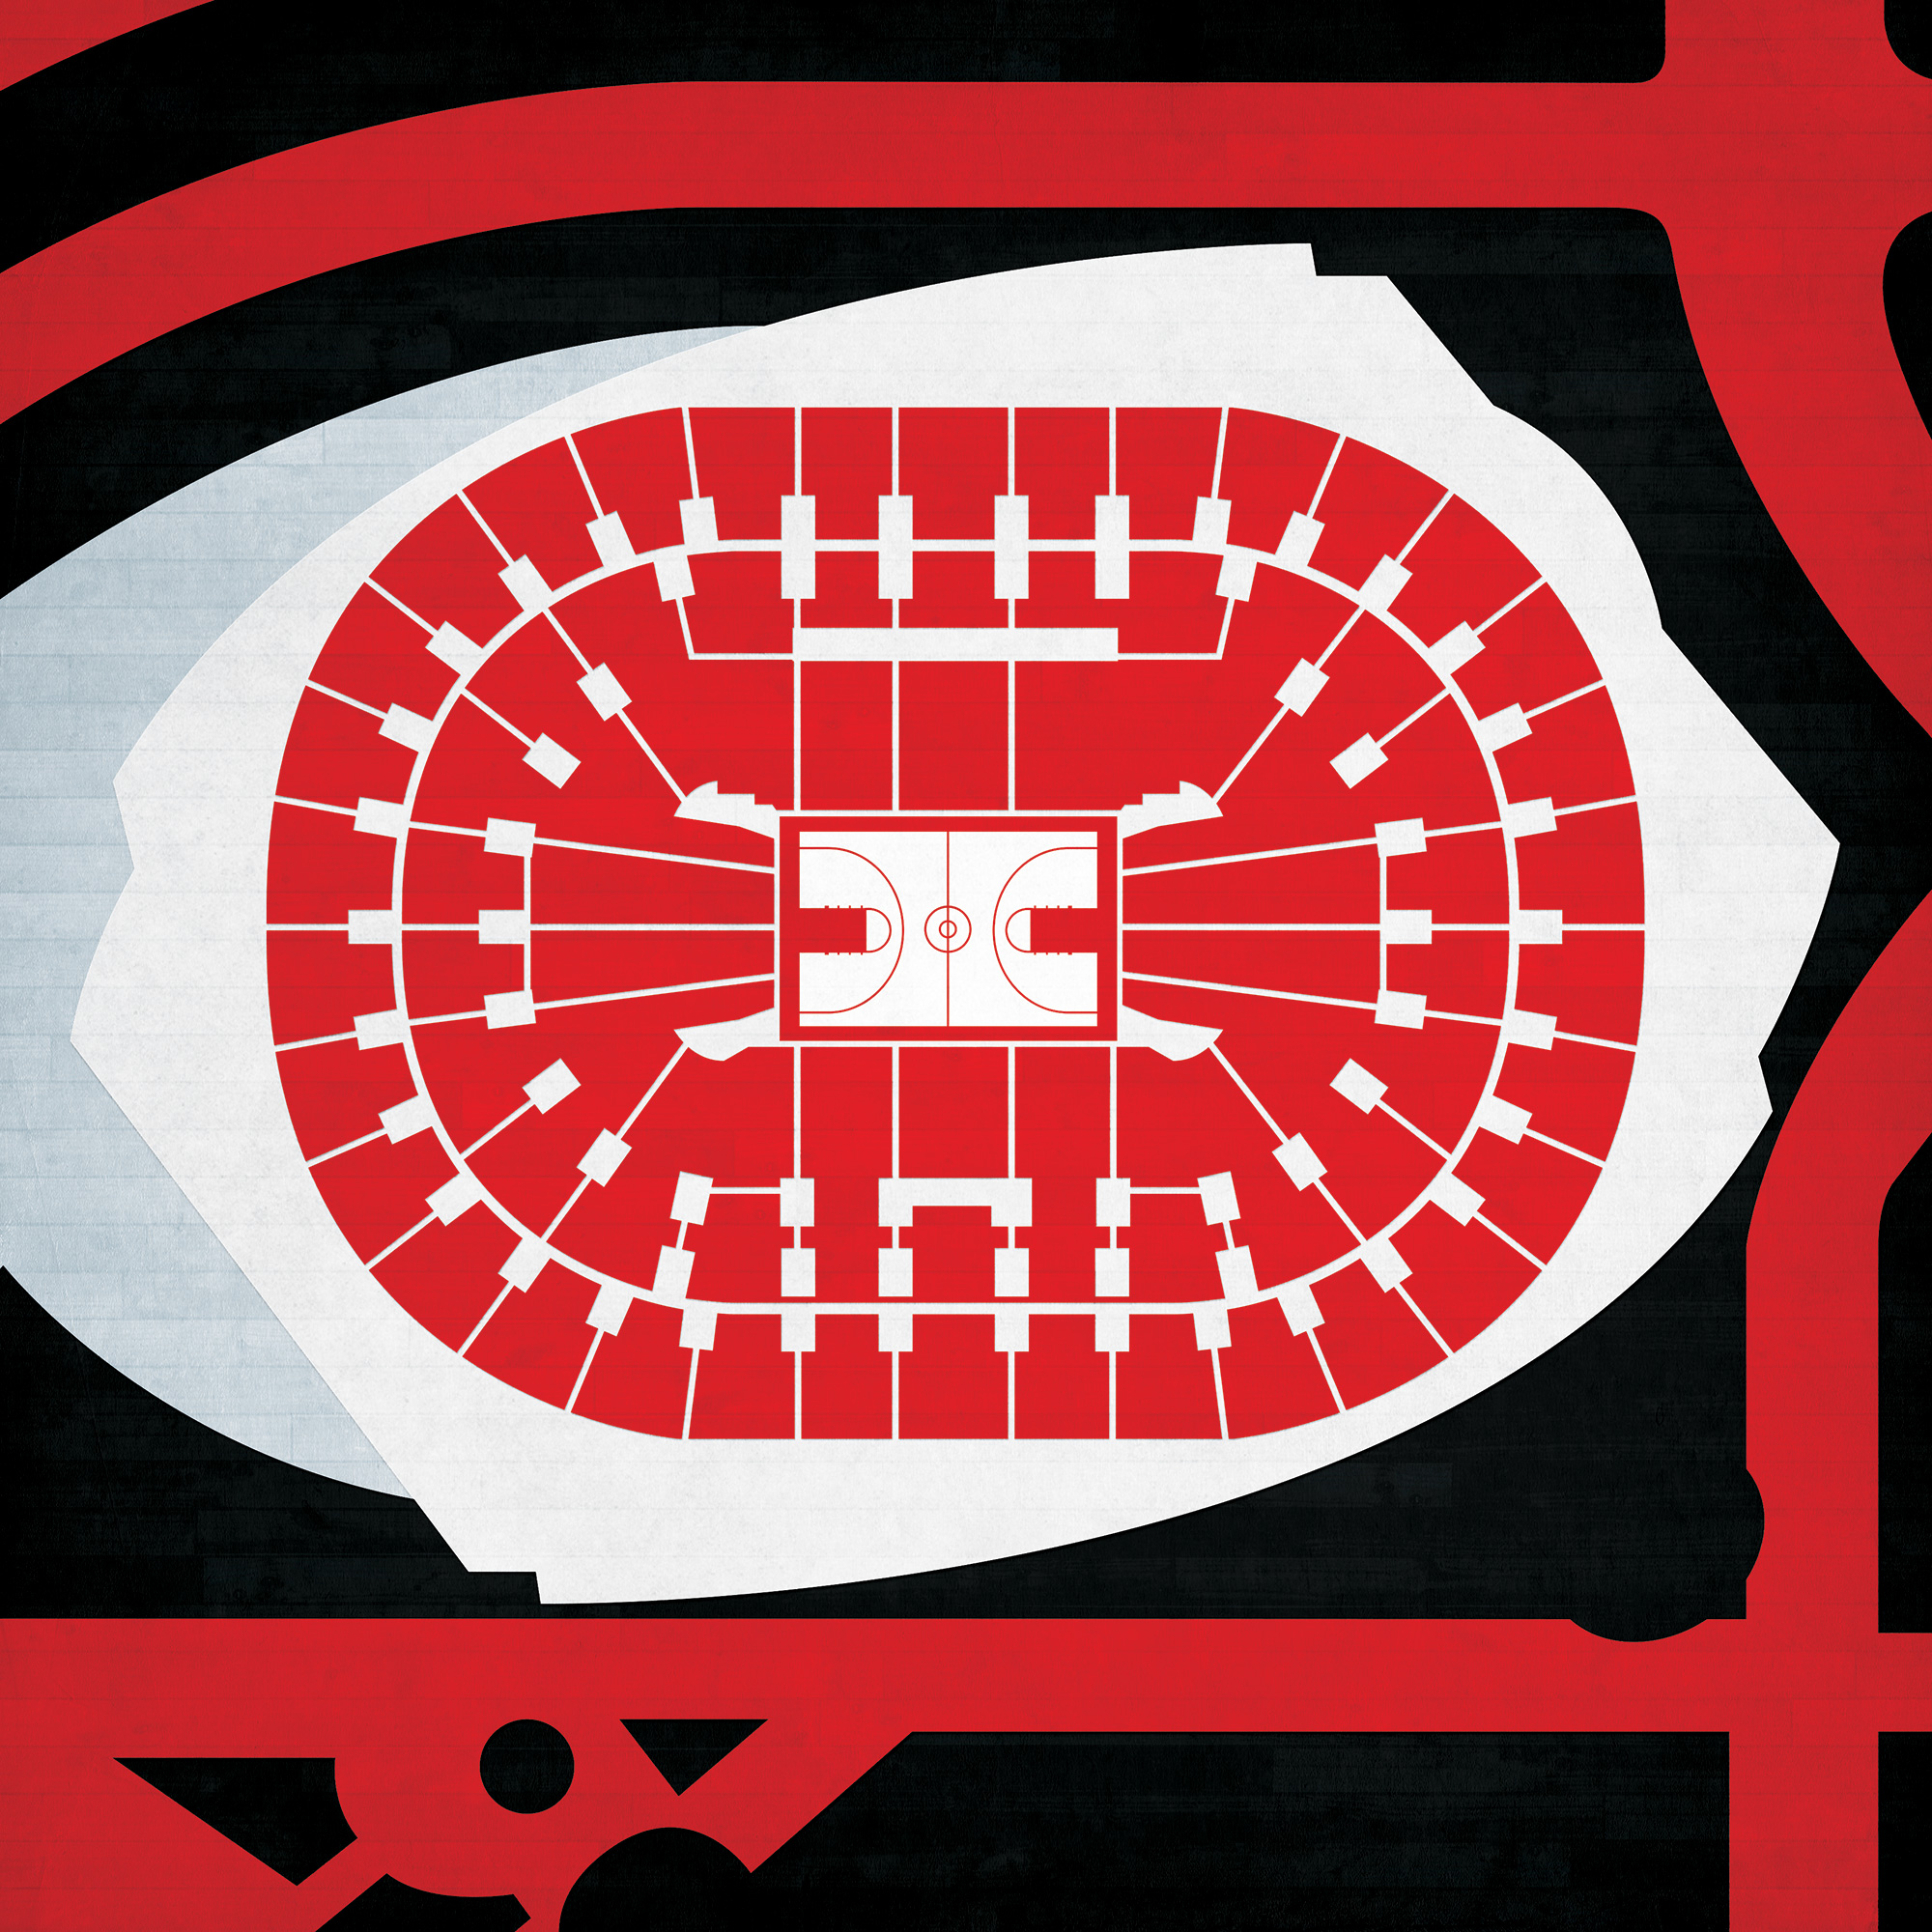 Moda Center, Portland OR - Seating Chart View